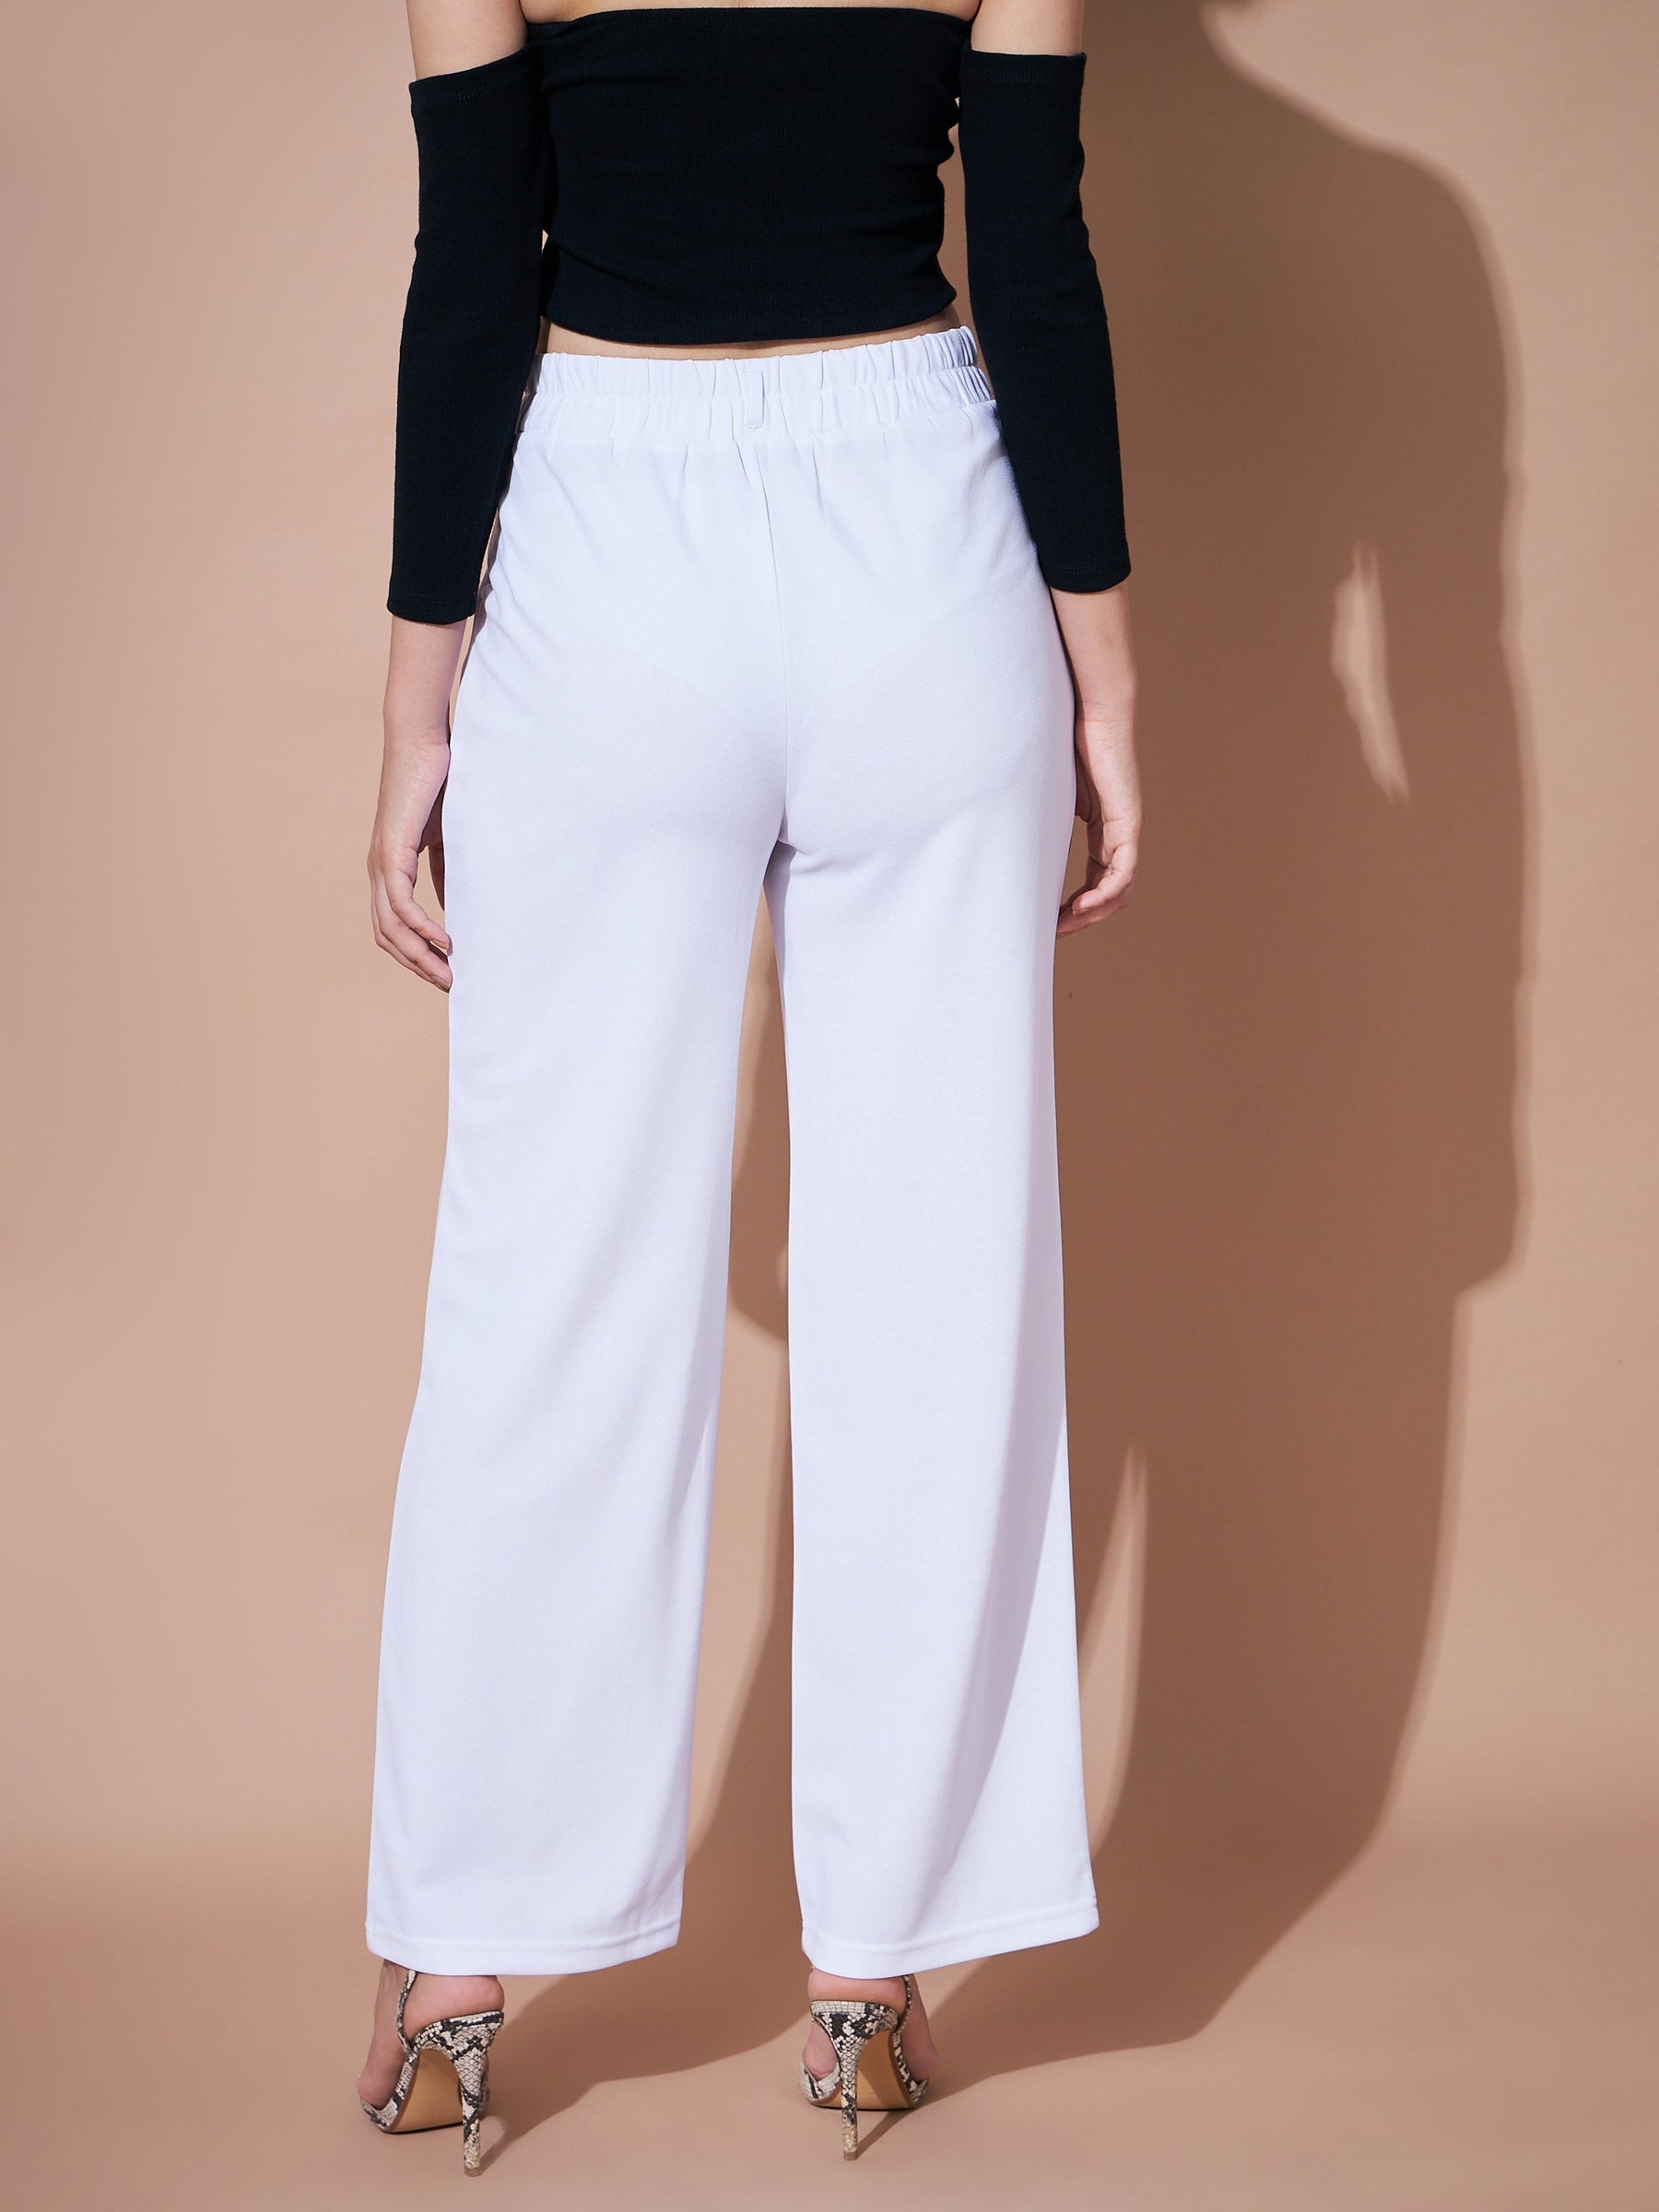 70s Vintage Palazzo Pant Pleated Pants White High Waist Wide Legged Pants  Belted Pants Flowy Pants Bell Bottoms Small/medium - Etsy | Pleated pants,  Flowy pants, High waist wide leg pants